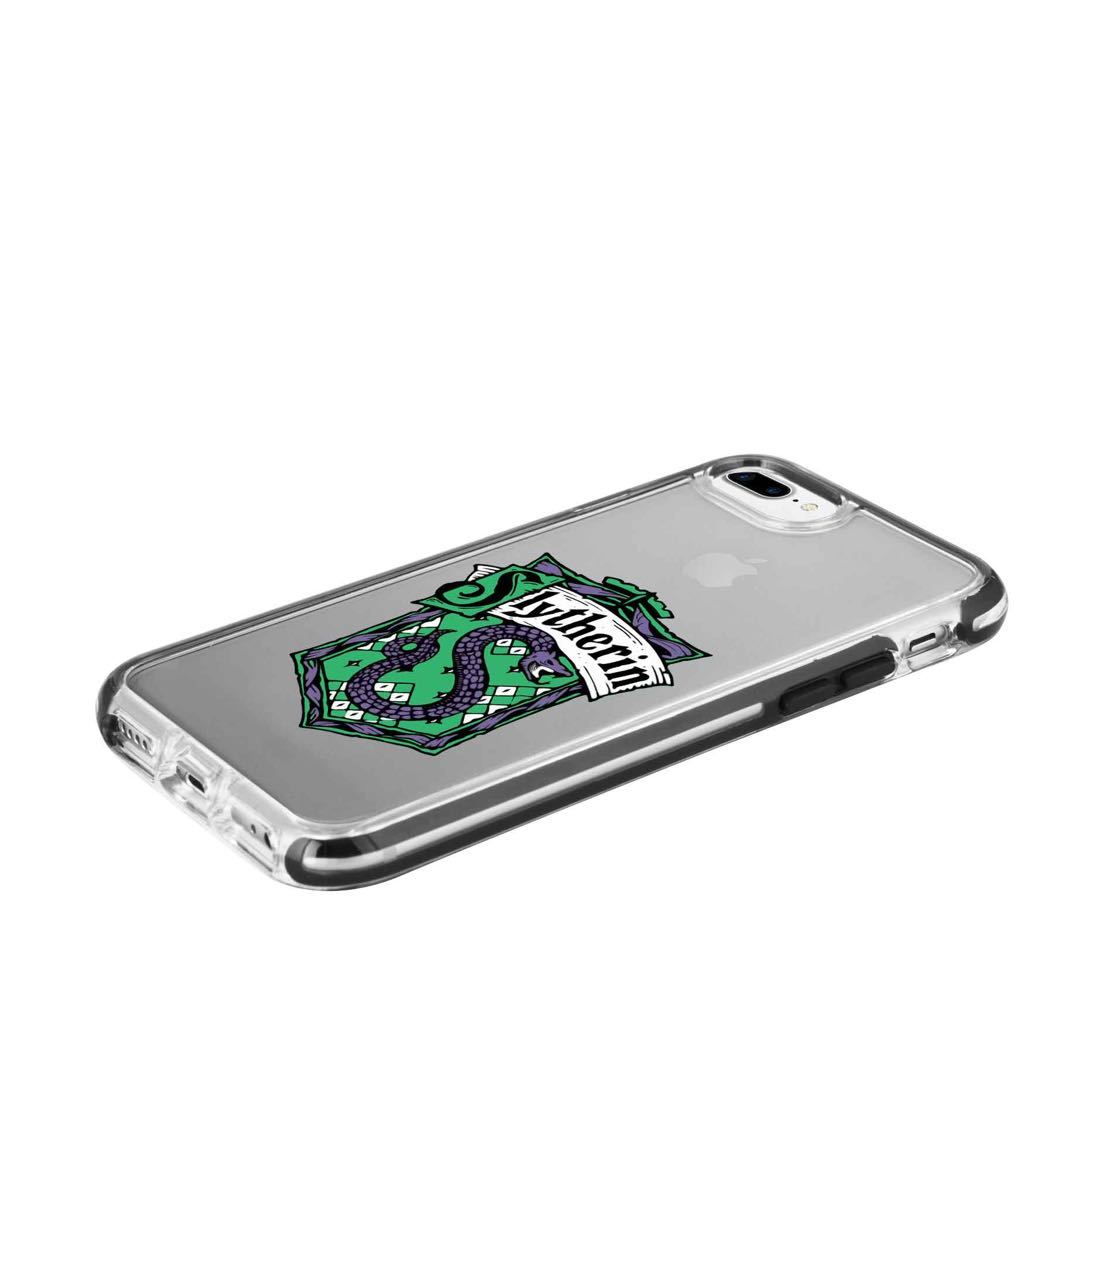 Crest Slytherin - Extreme Phone Case for iPhone 7 Plus